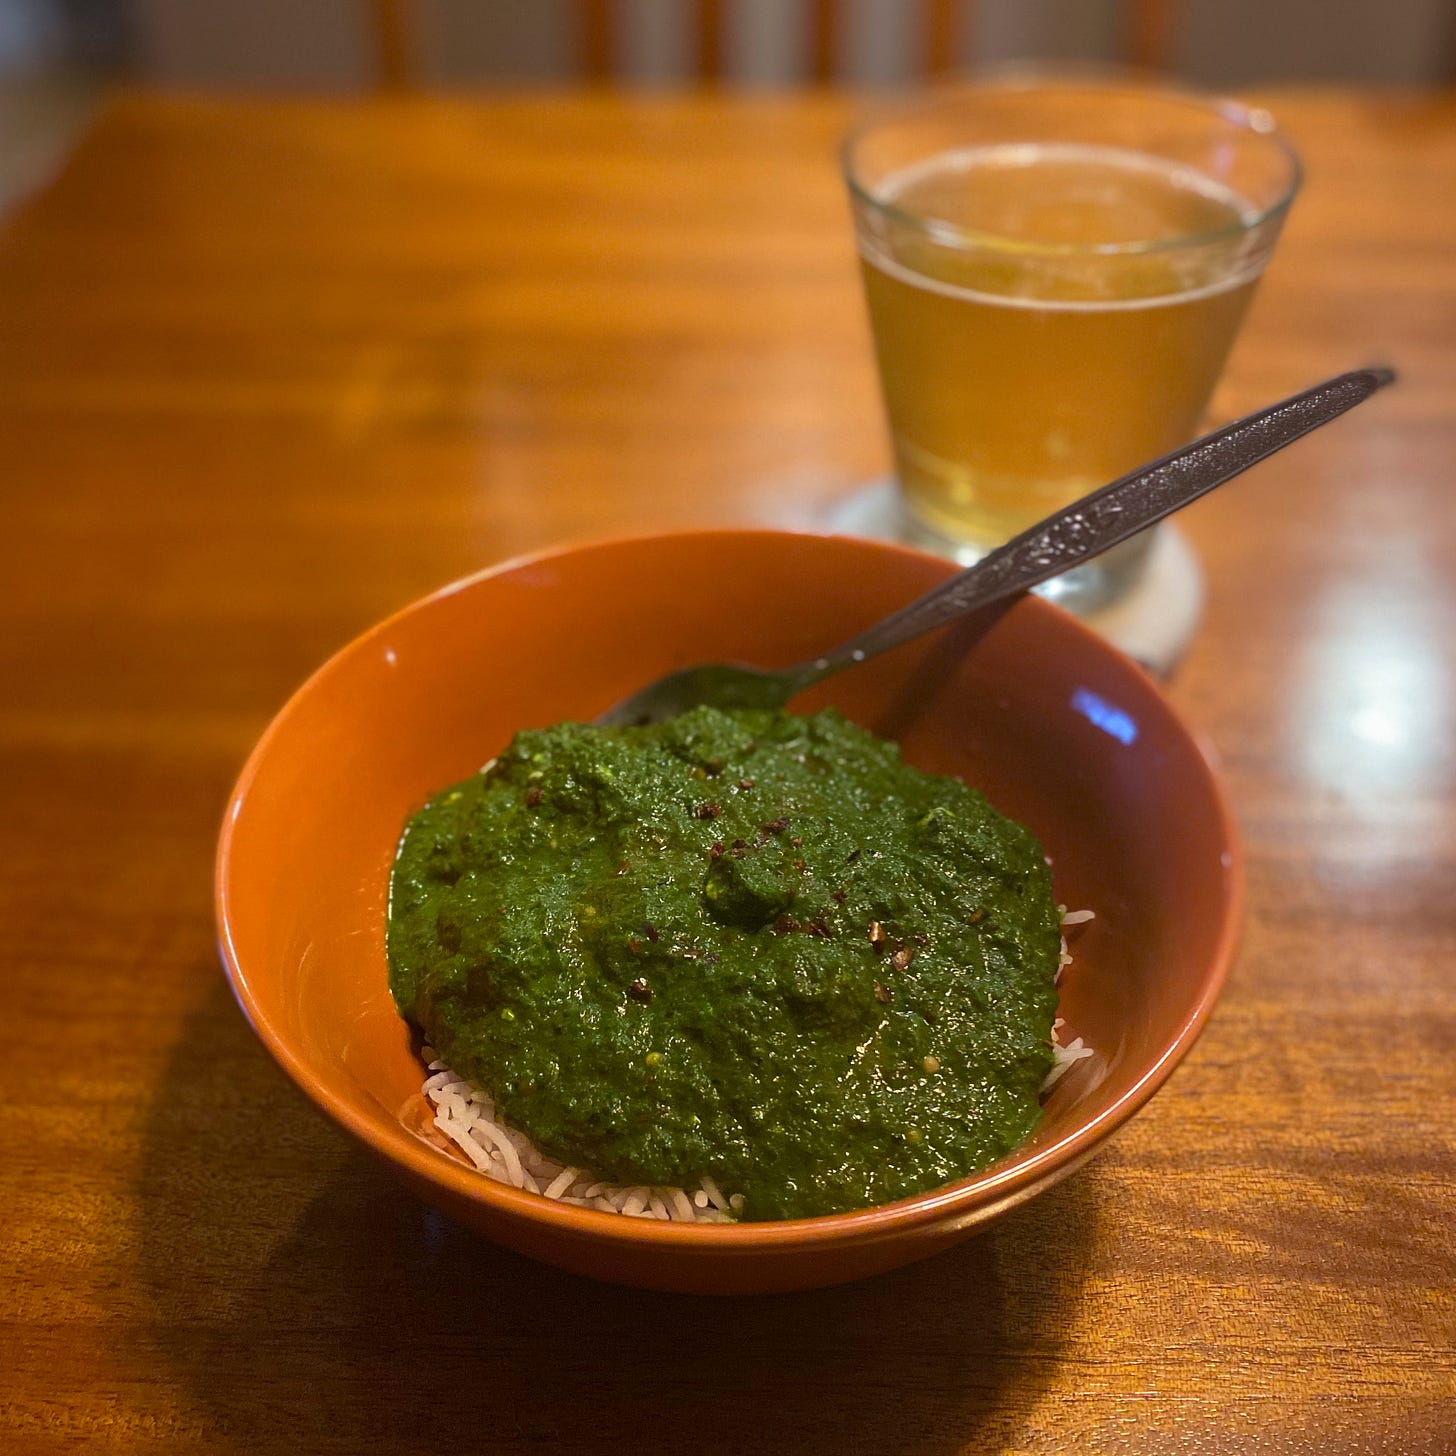 An orange bowl of basmati rice with dark green saag paneer overtop, dusted with chili flakes. A fork sits at the back of the bowl, and a glass of beer is on the coaster behind it.